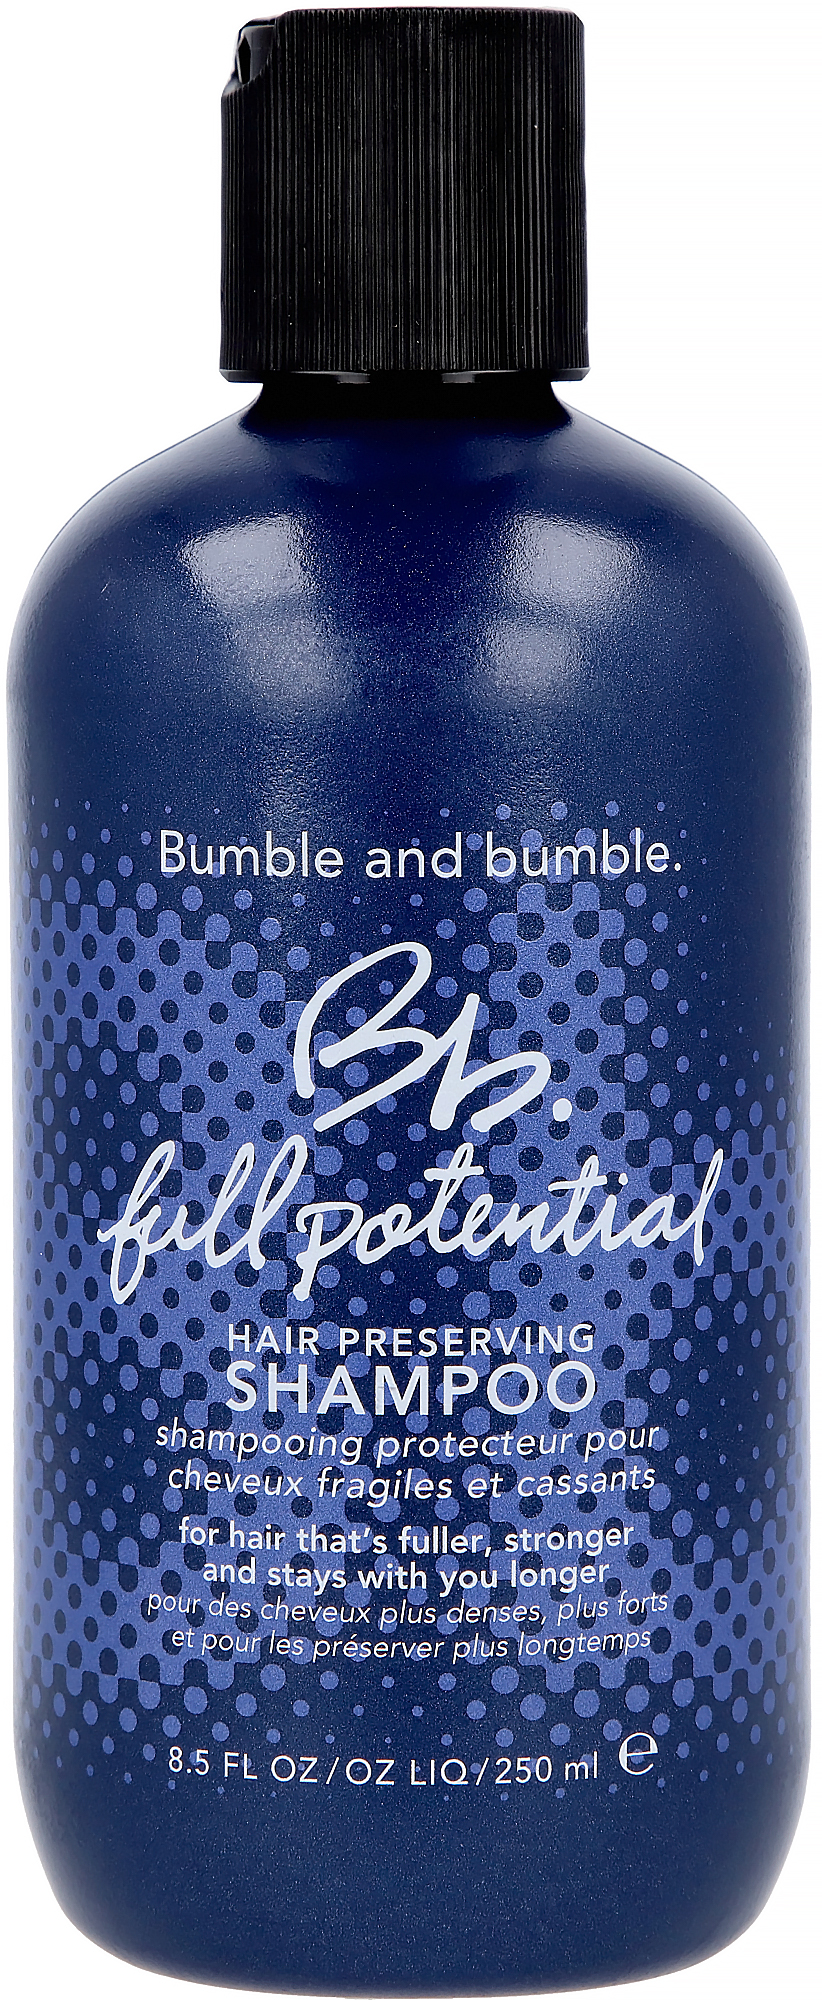 Bumble and bumble Full Potential Hair Shampoo 250ml